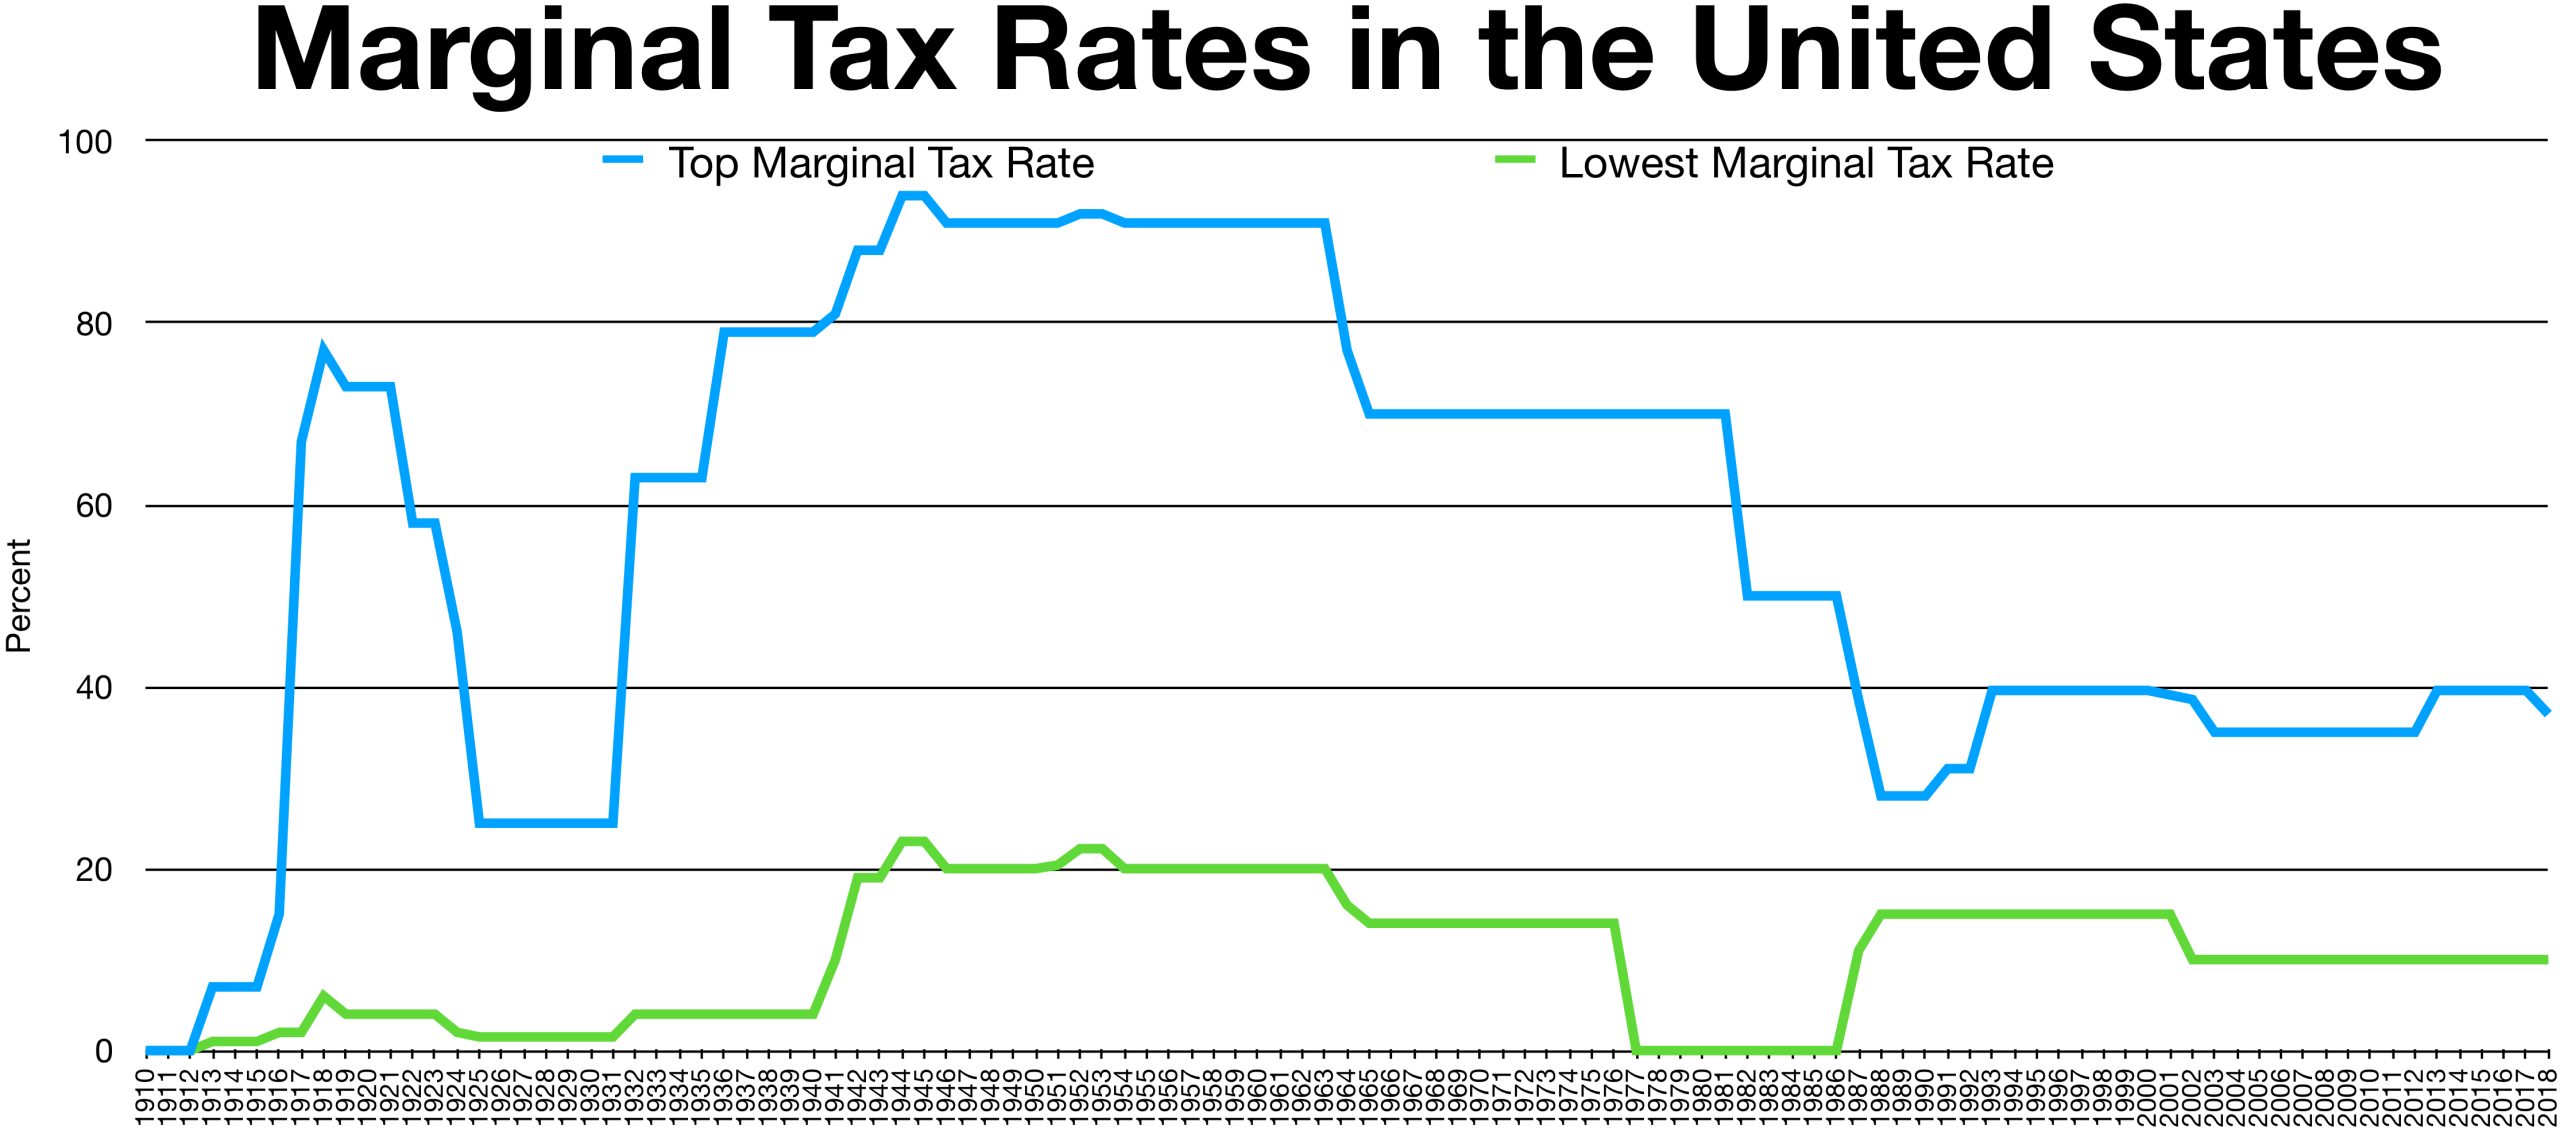 historical_marginal_tax_rate_for_highest_and_lowest_income_earners